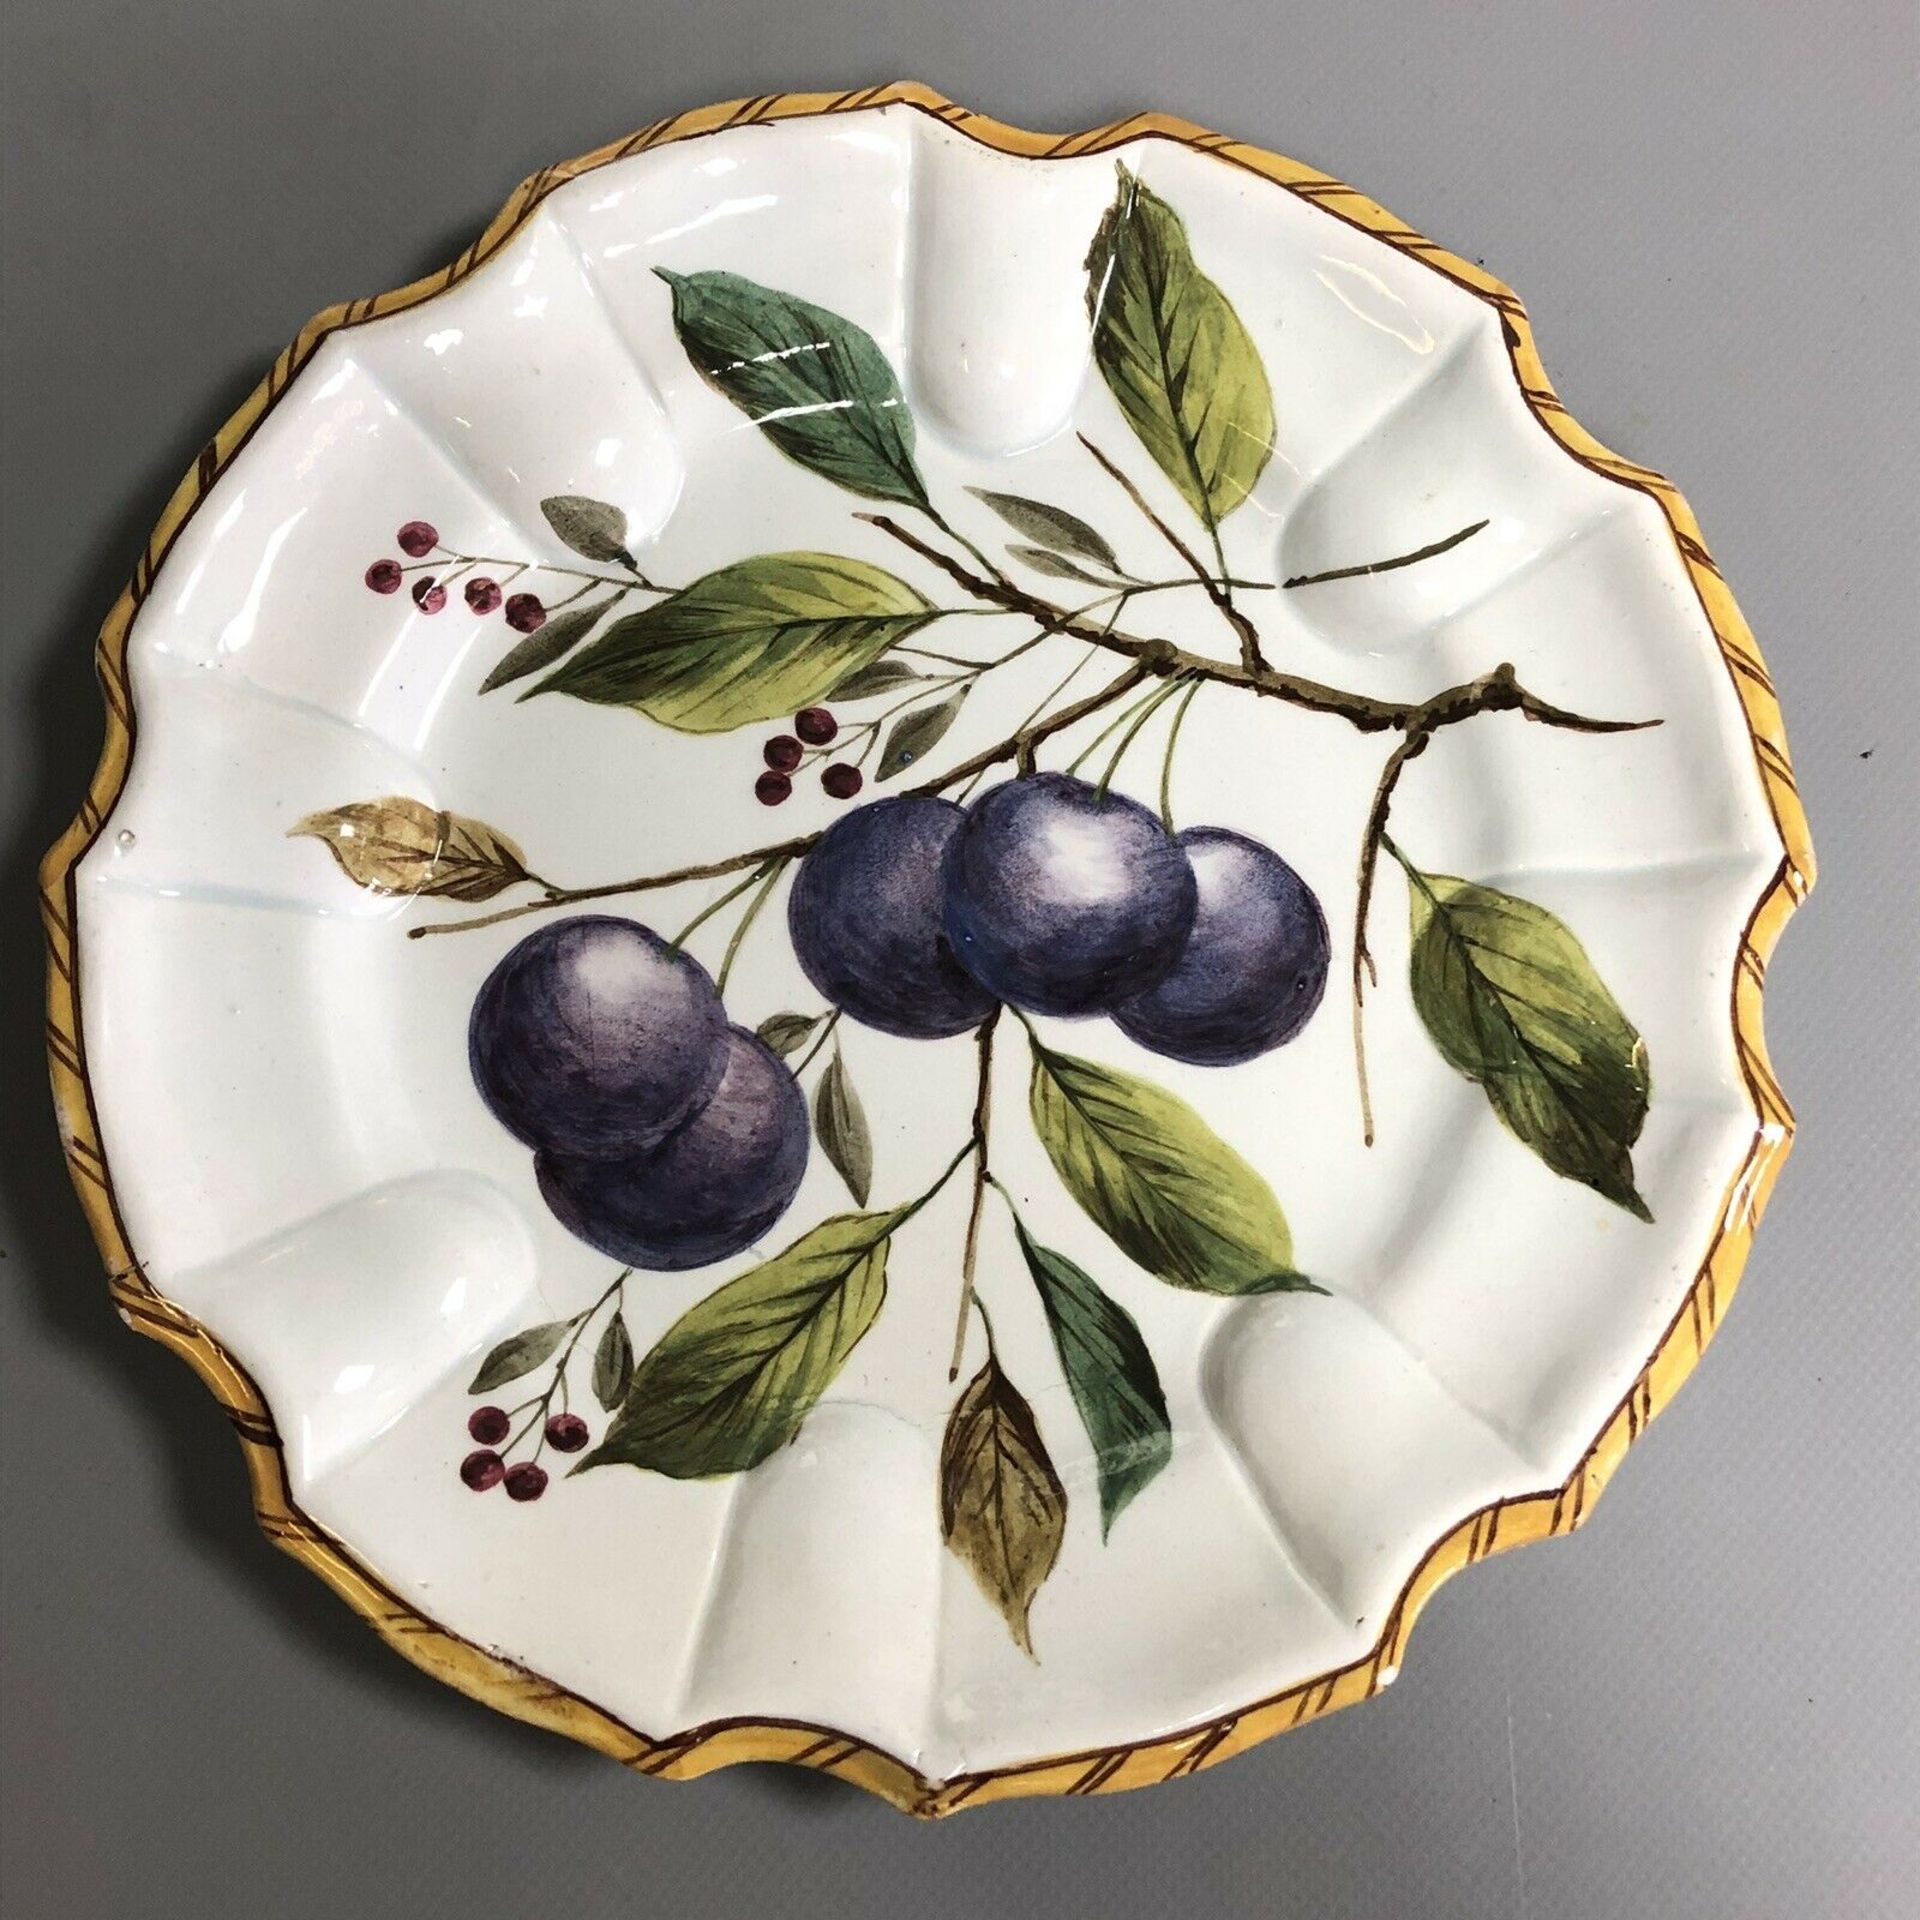 3 antique Continental pottery plates with hand painted fruits Faience Delft? - Image 2 of 8